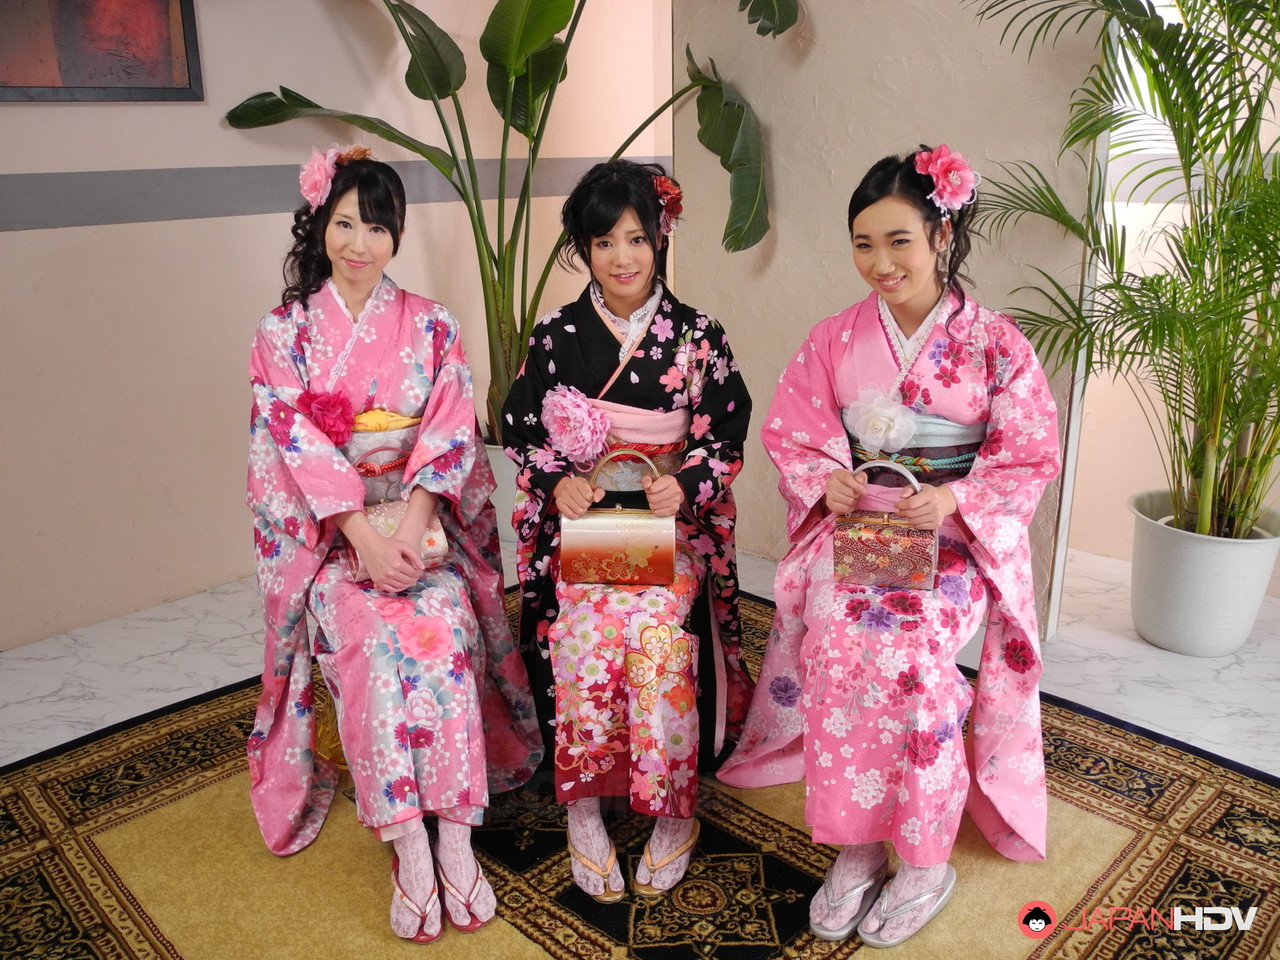 Sexy Asian girl Hina & her friends suck a dick wearing traditional Asian robes foto porno #424210118